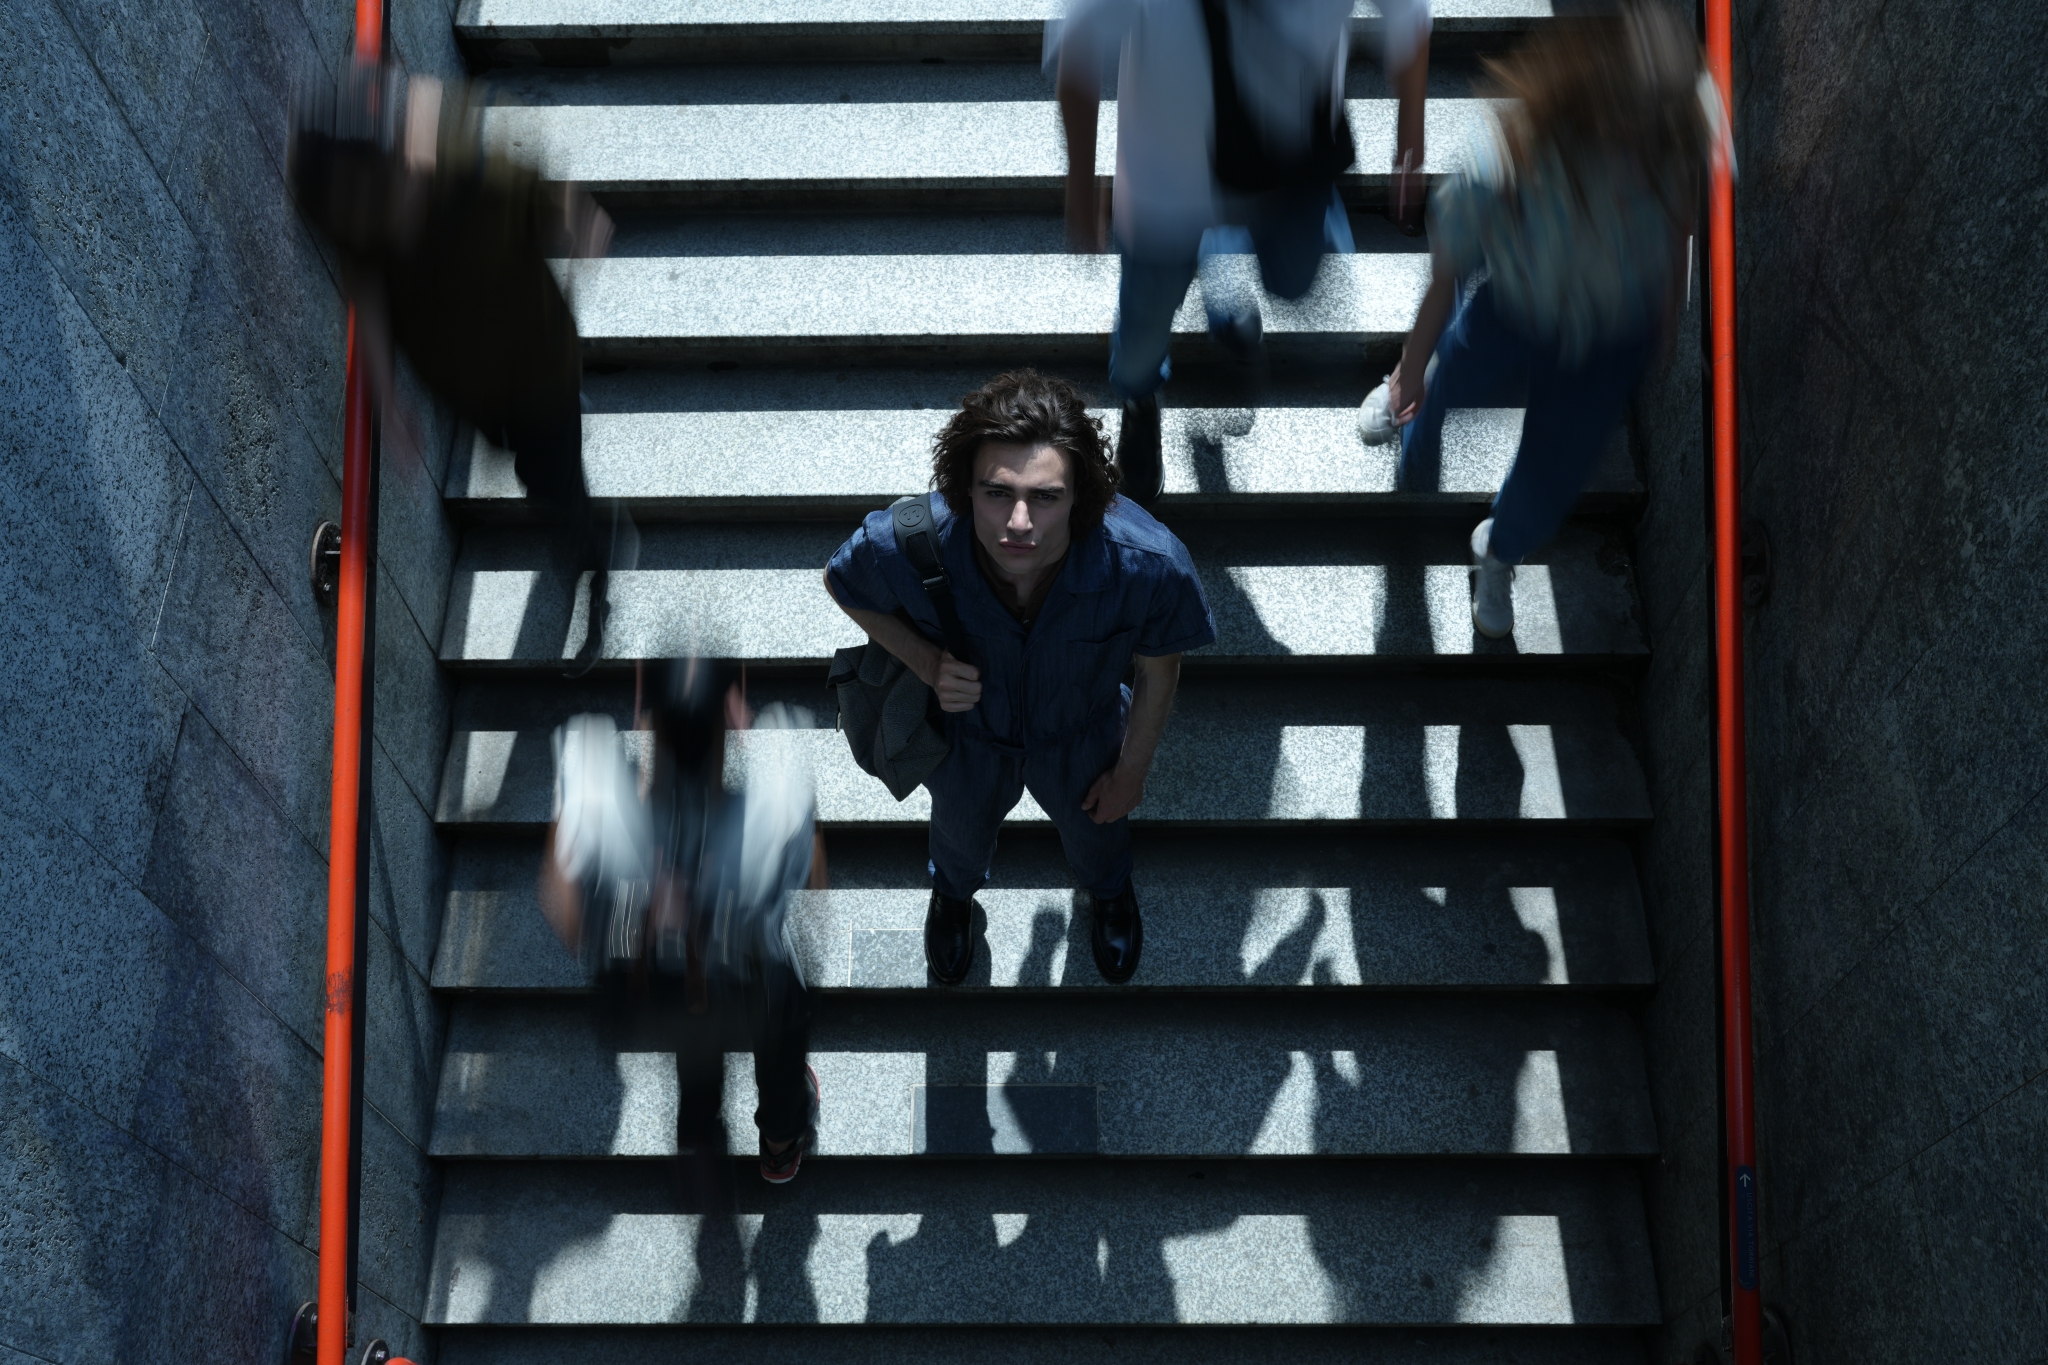 Aerial shot of male model stood on a staircase looking upward as people pass by